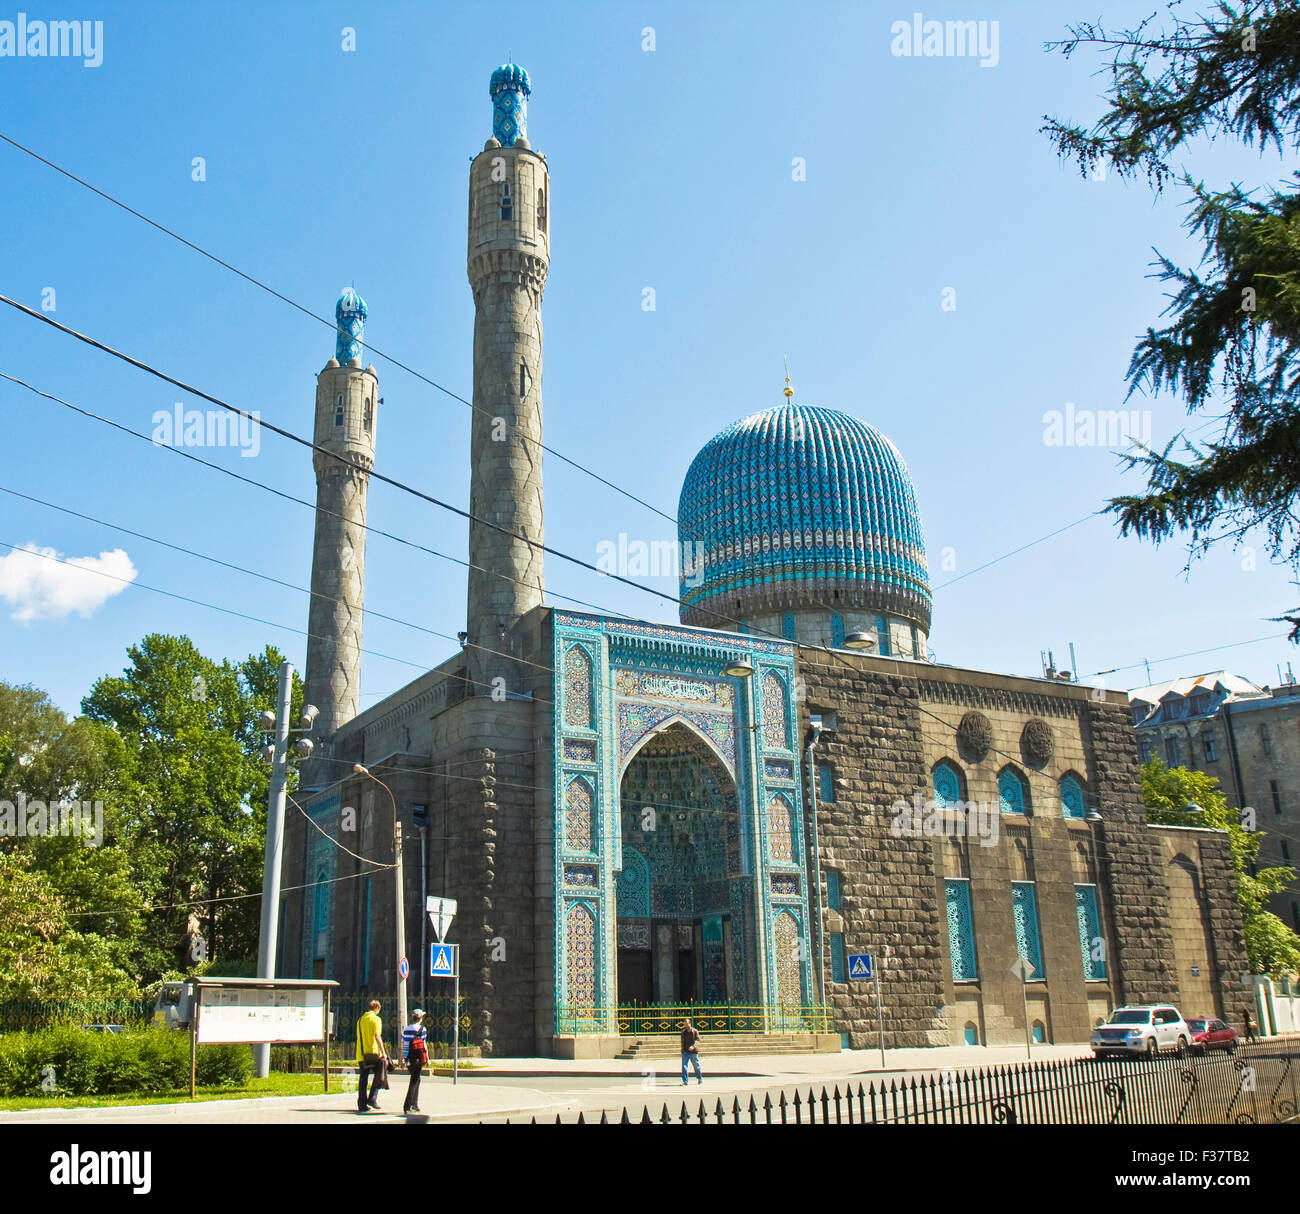 St. Petersburg, Russia - July 03, 2012: Cathedral mosque, 1909-1920, architect N. V. Vasilyev, unidentified people on the street Stock Photo